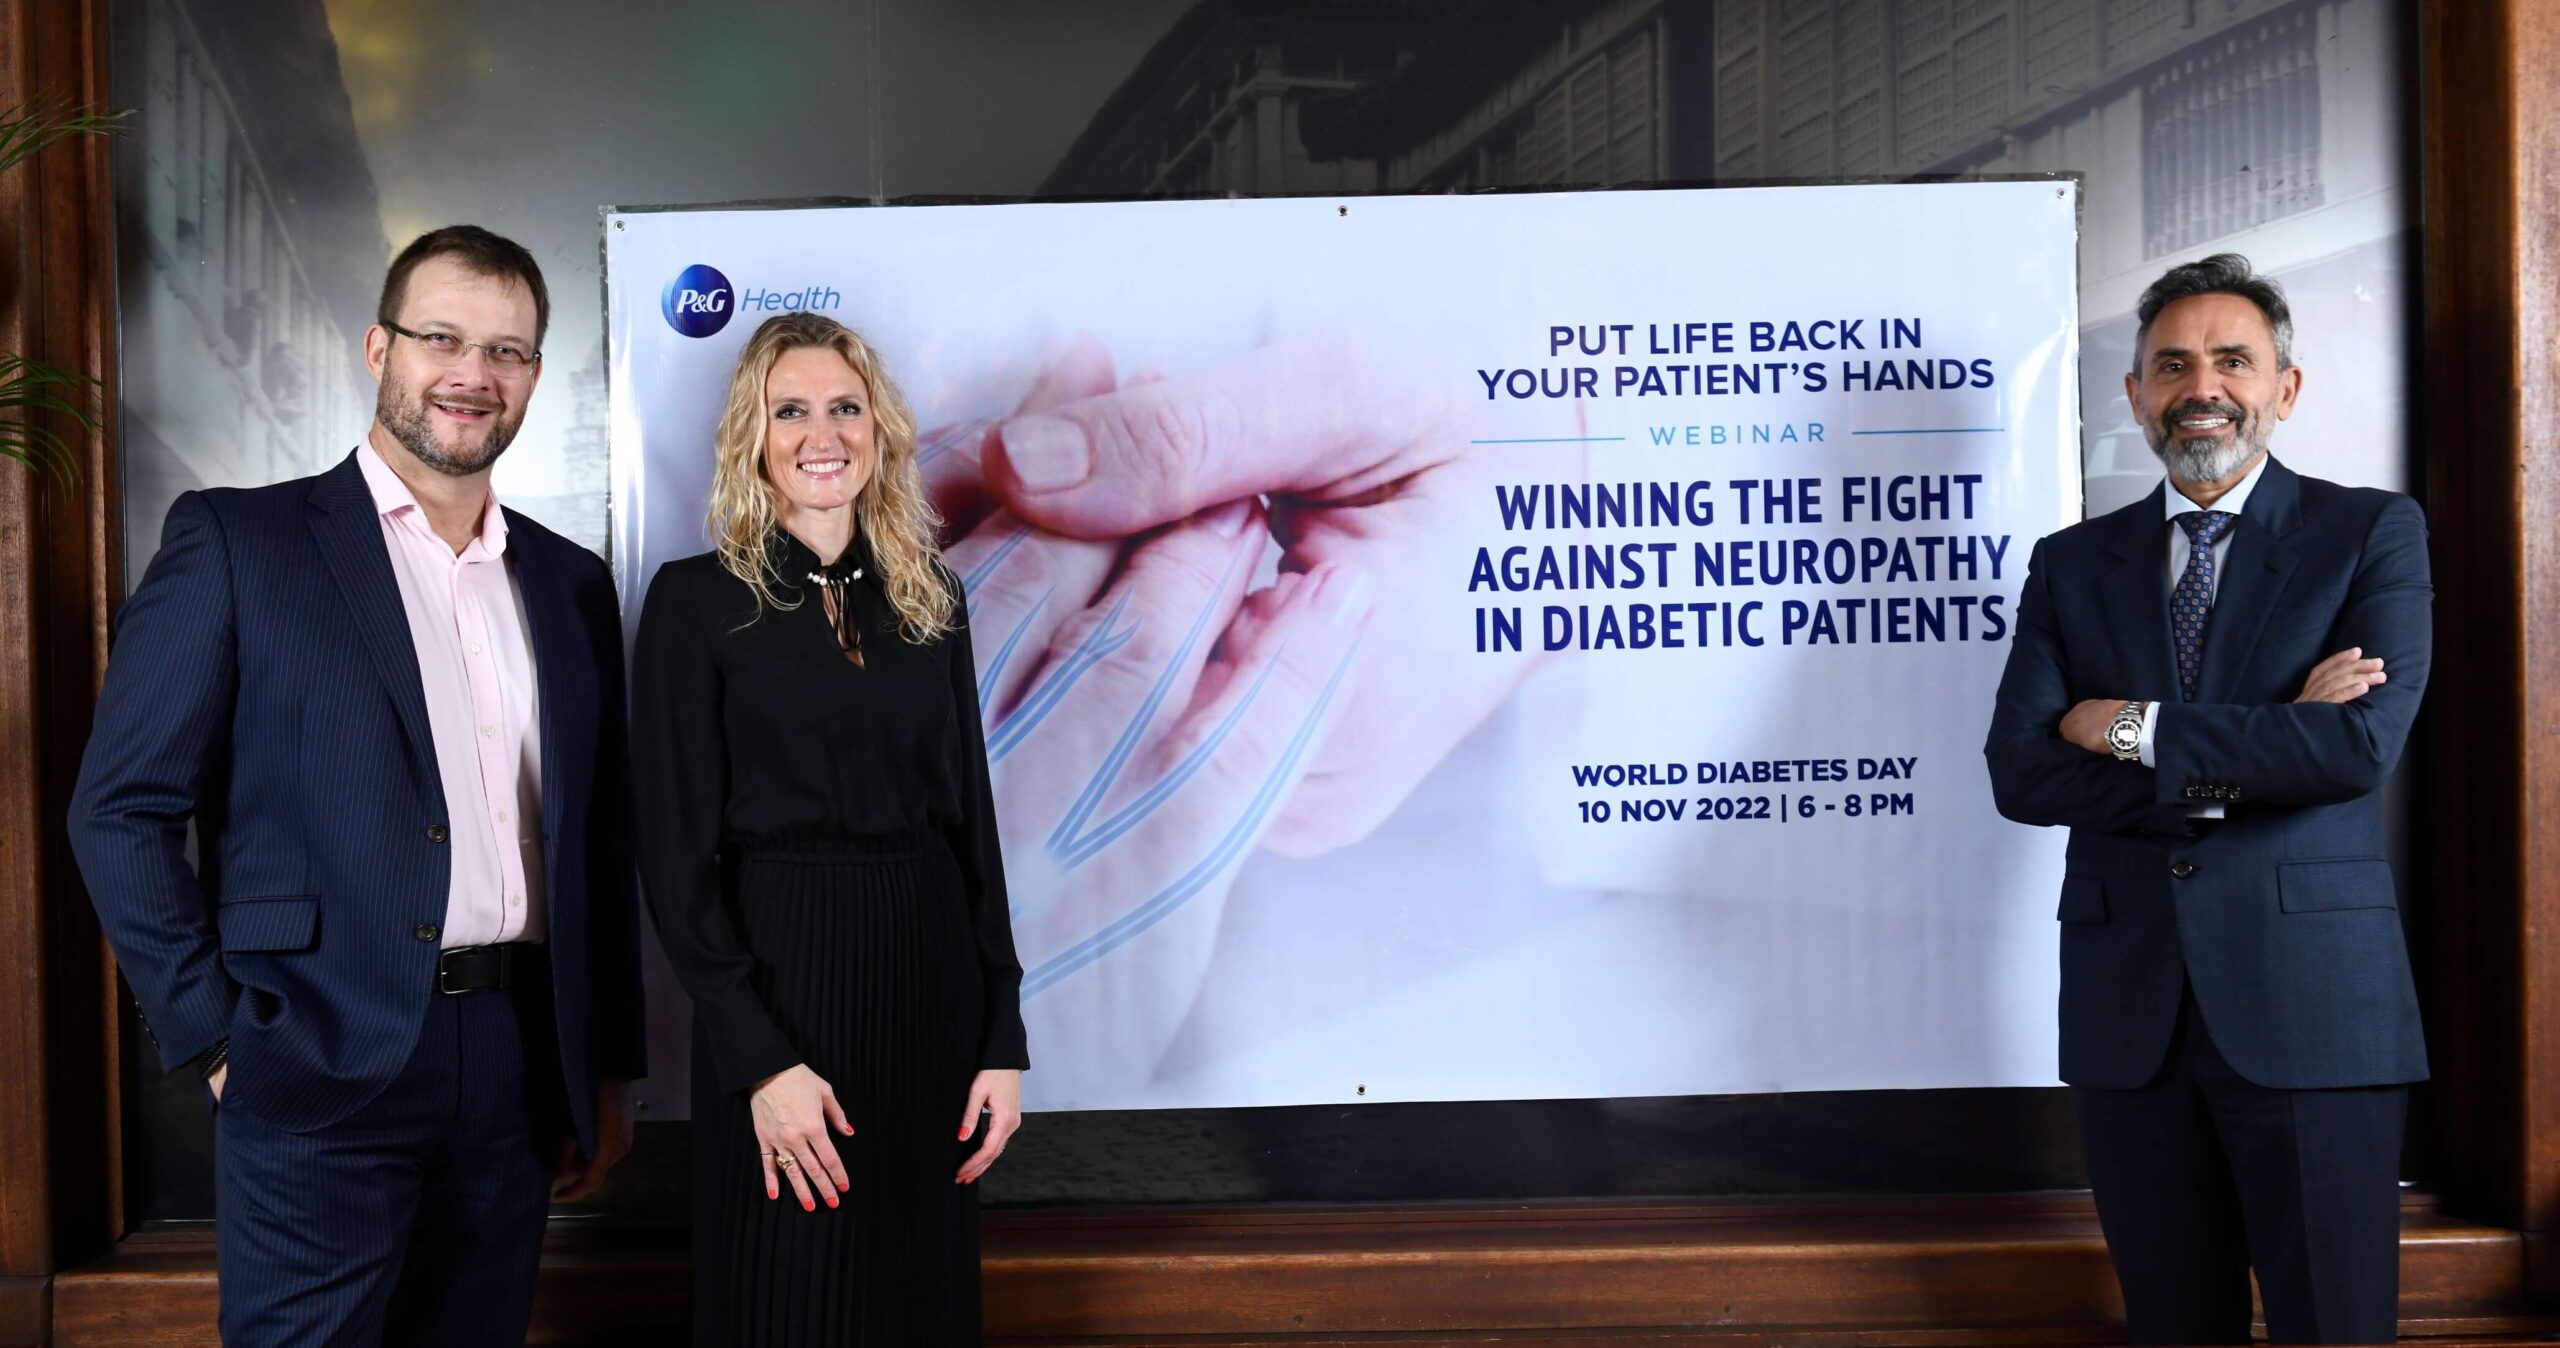 Winning the Fight Against Neuropathy in Diabetic Patients